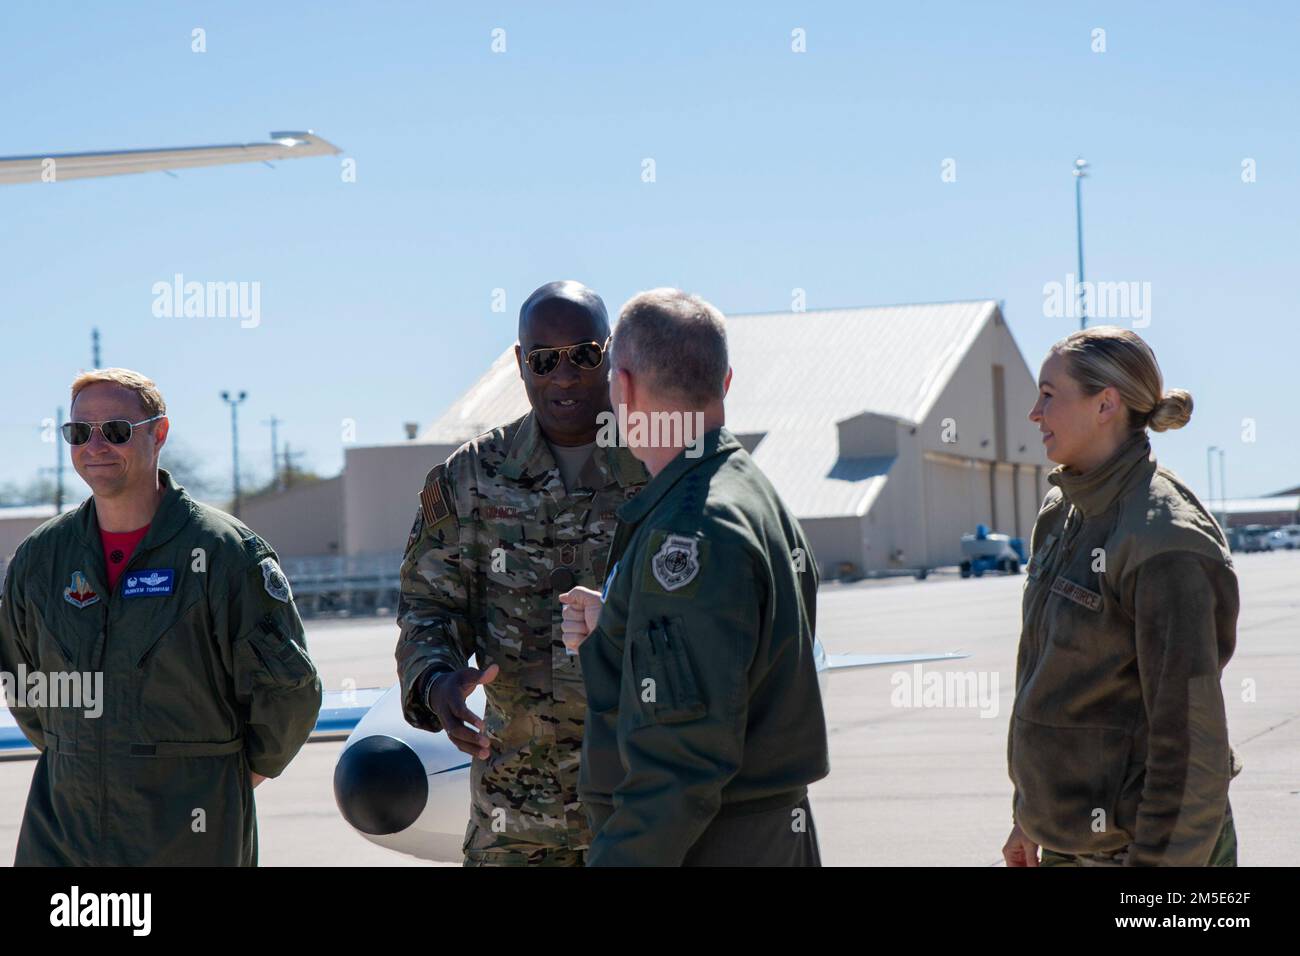 U.S. Air Force Gen. Mark Kelly, commander of Air Combat Command, greets the 355th Wing Commander Col. Joseph Turnham (left) and the 355th Wing’s Command Chief Master Sgt. Dana Council, during Heritage Flight Training Course at Davis-Monthan Air Force Base, Arizona, March 6, 2022. Kelly visited the newly designated Lead Wing and certified ACC’s Heritage Flight Training Course hosted at Davis-Monthan Air Force Base, Arizona, from March 2-6. Stock Photo